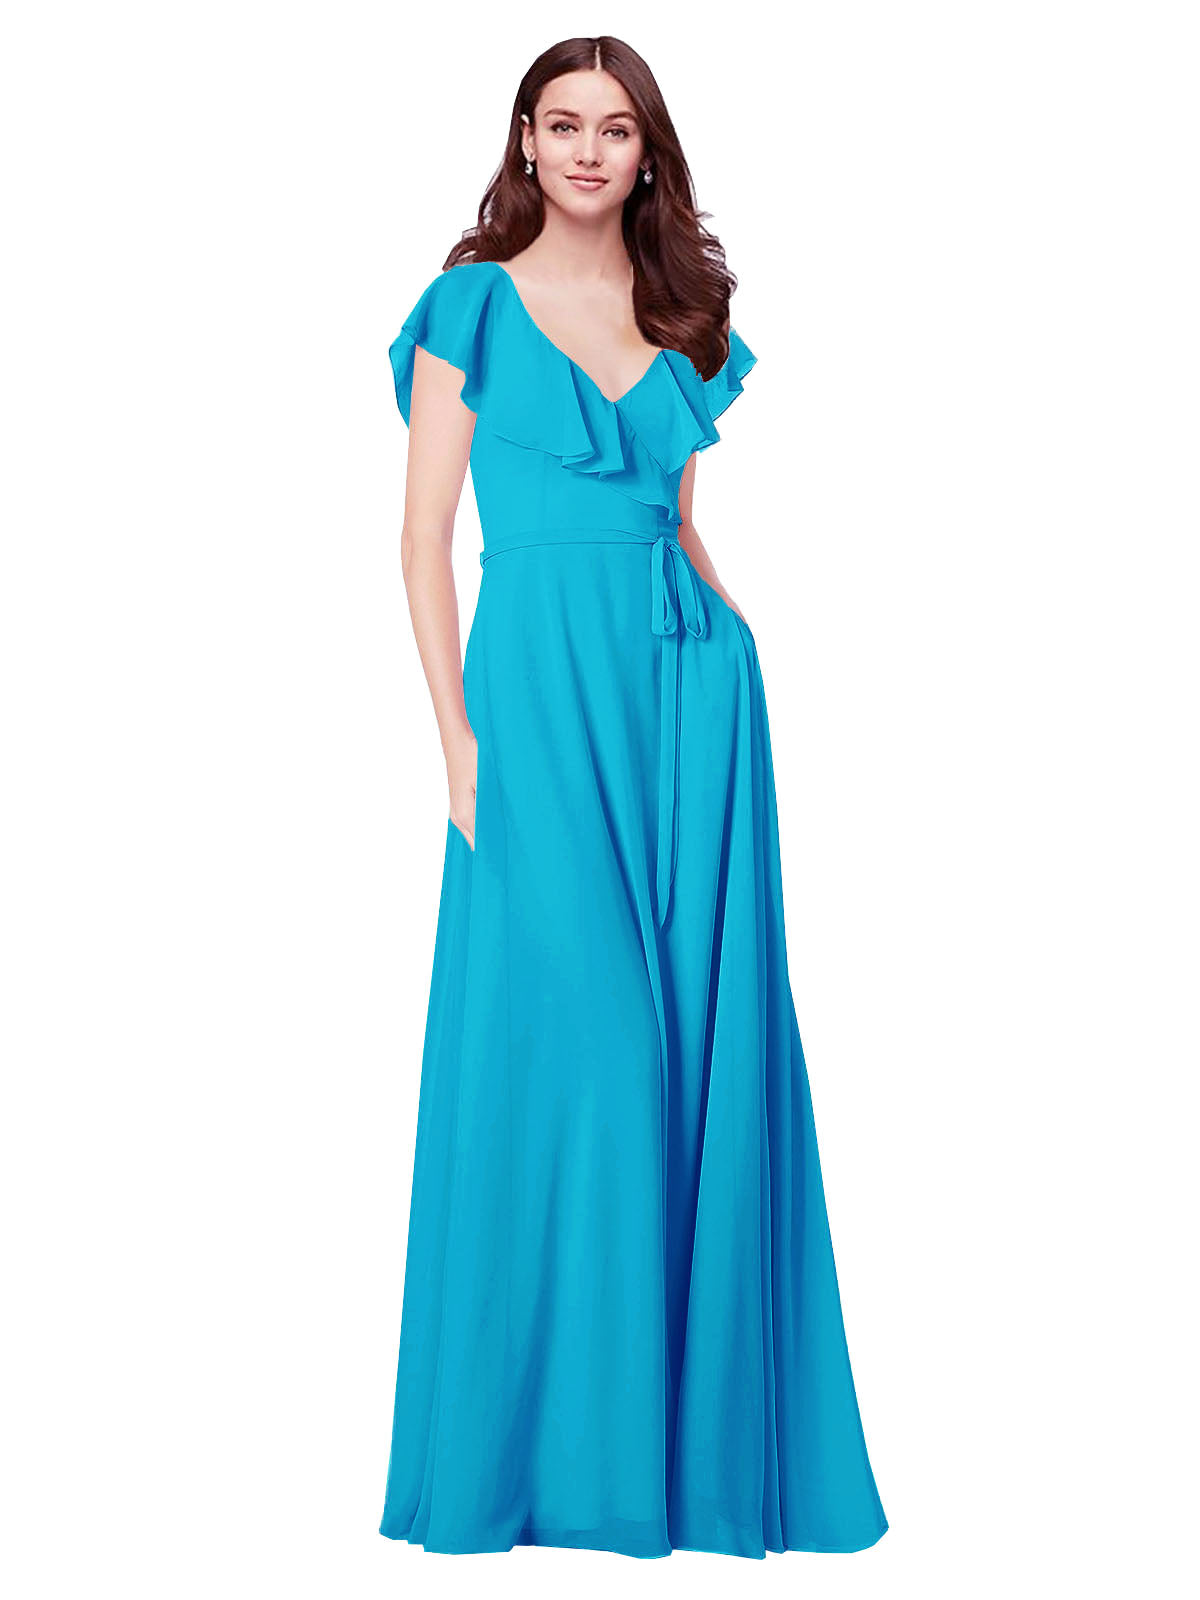 RightBrides Chante Turquoise A-Line V-Neck Cap Sleeves Long Bridesmaid Dress